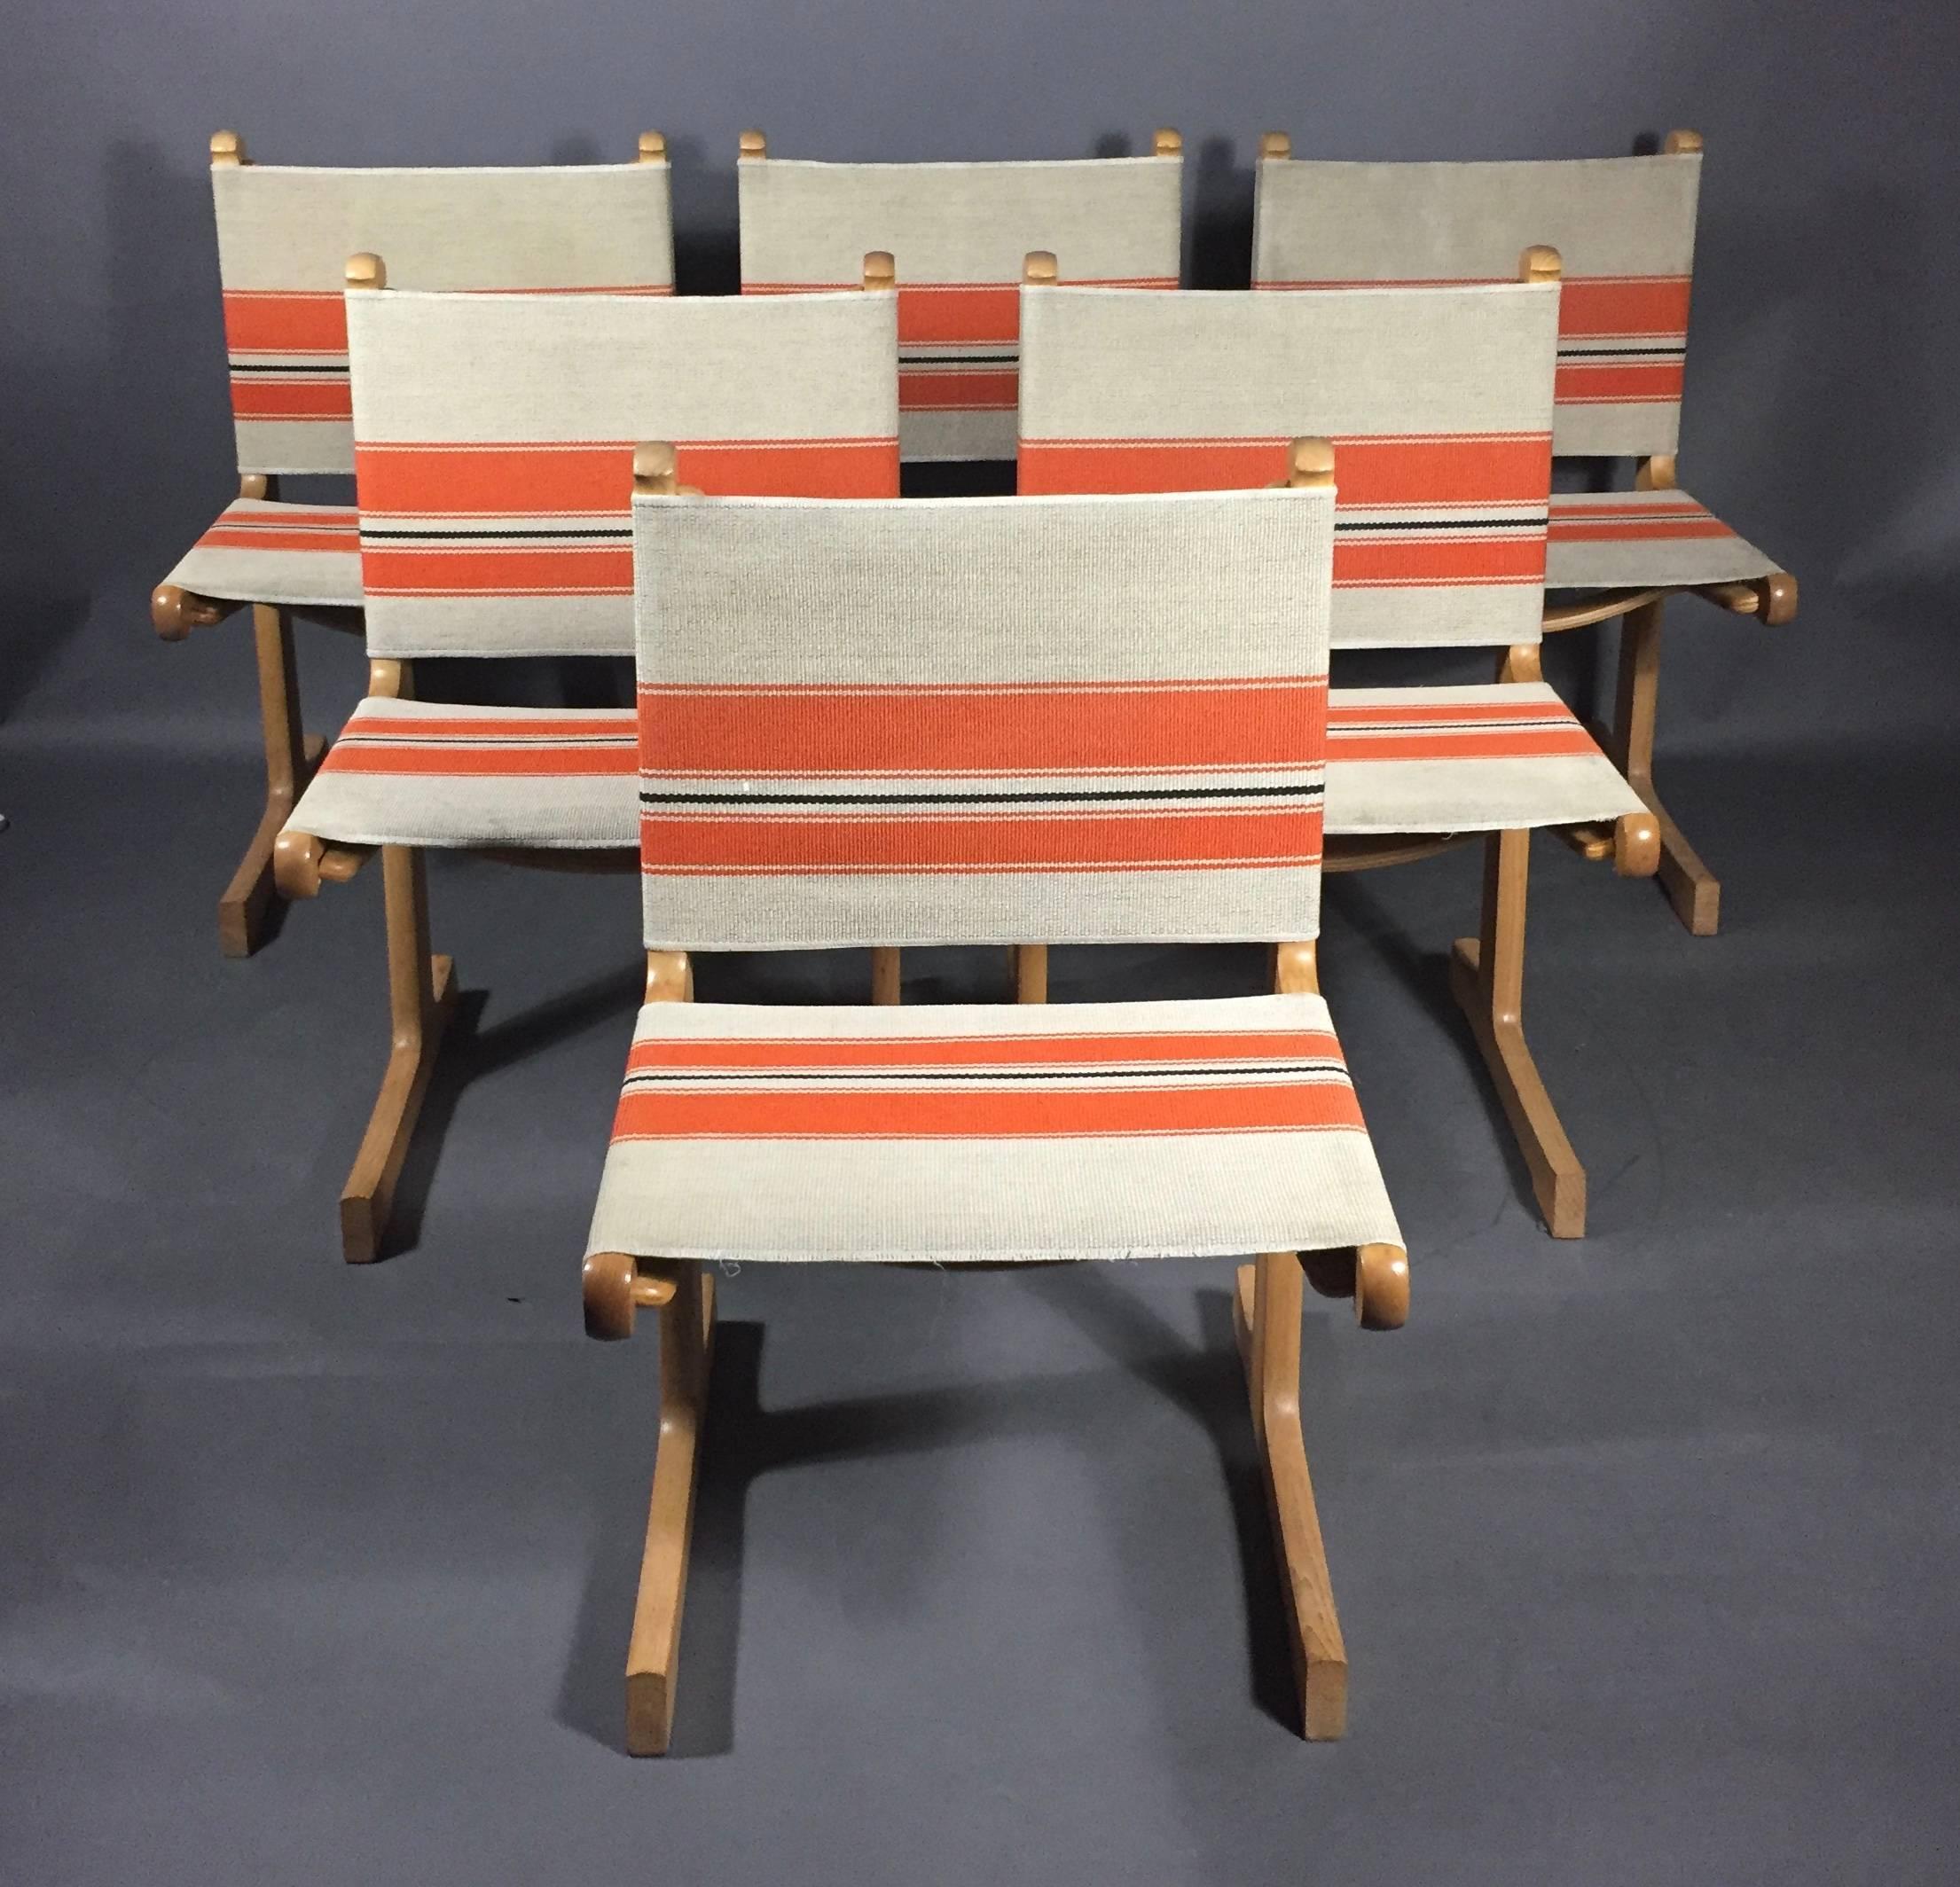 A Classic in Mid-Century Scandinavian design by the husband and wife architect team of Ditte and Adrian Heath. Solid ashwood frames with original orange stripe canvas in excellent condition. Manufactured by France & Søn with plaquette to underside